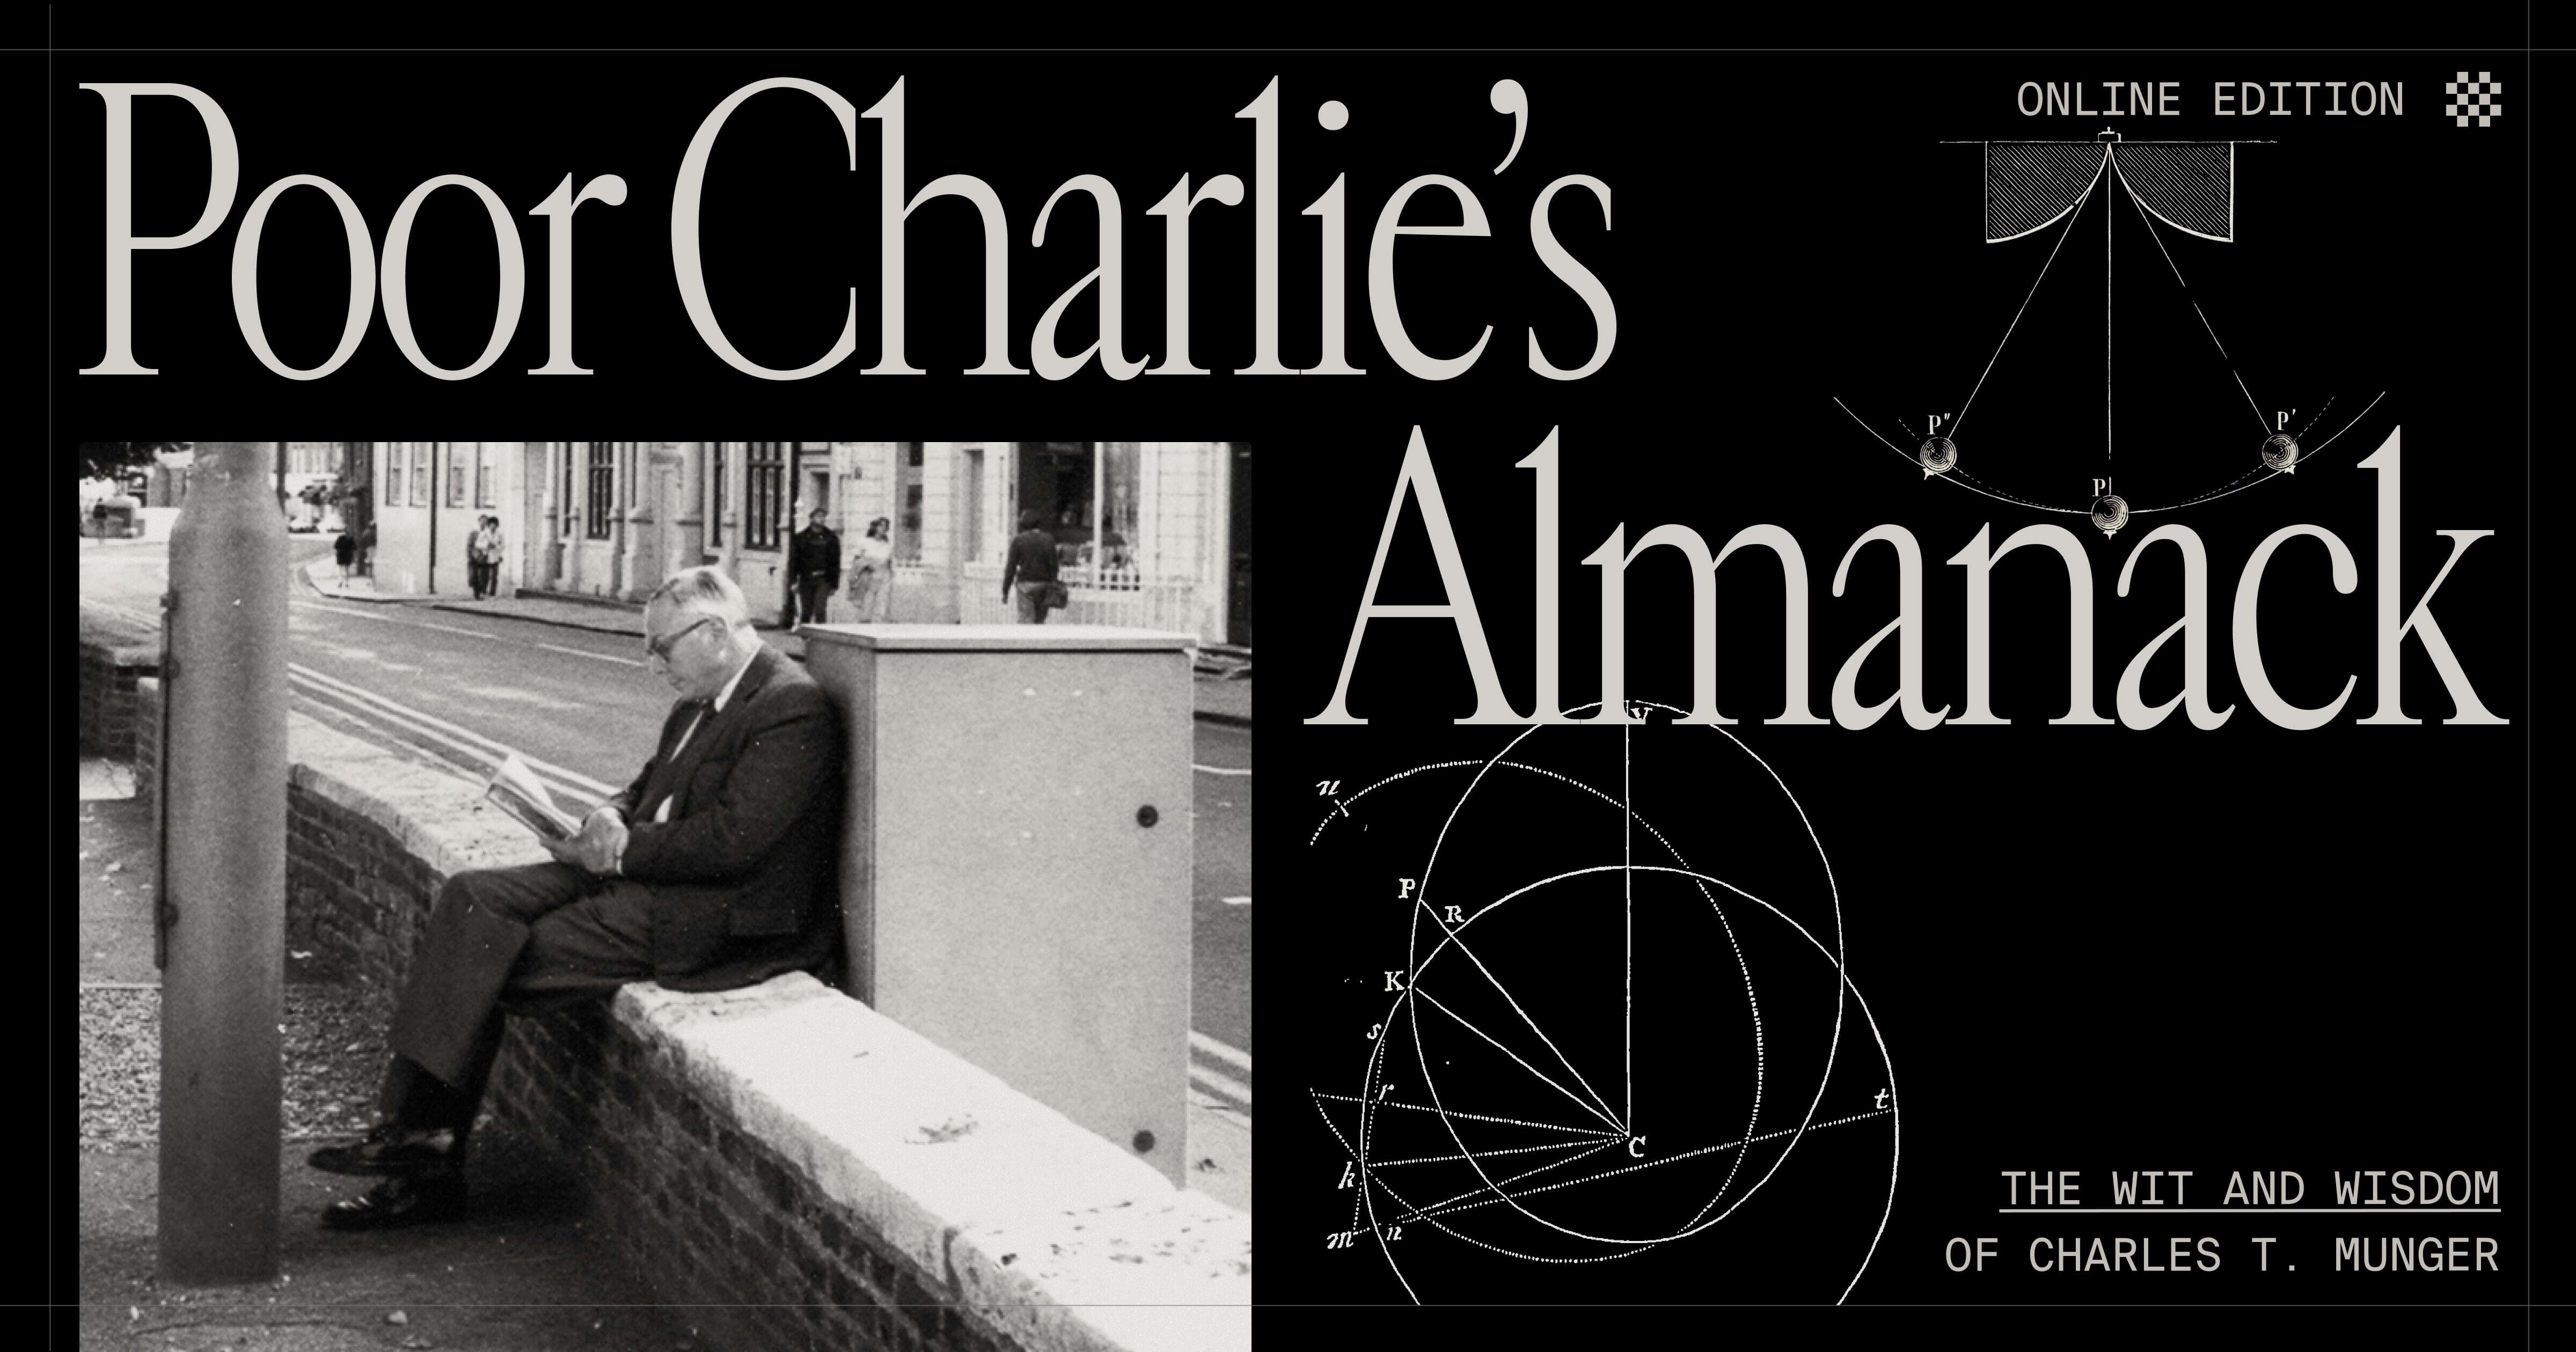 Poor Charlie's Almanack: The Essential Wit and Wisdom of Charles T. Munger